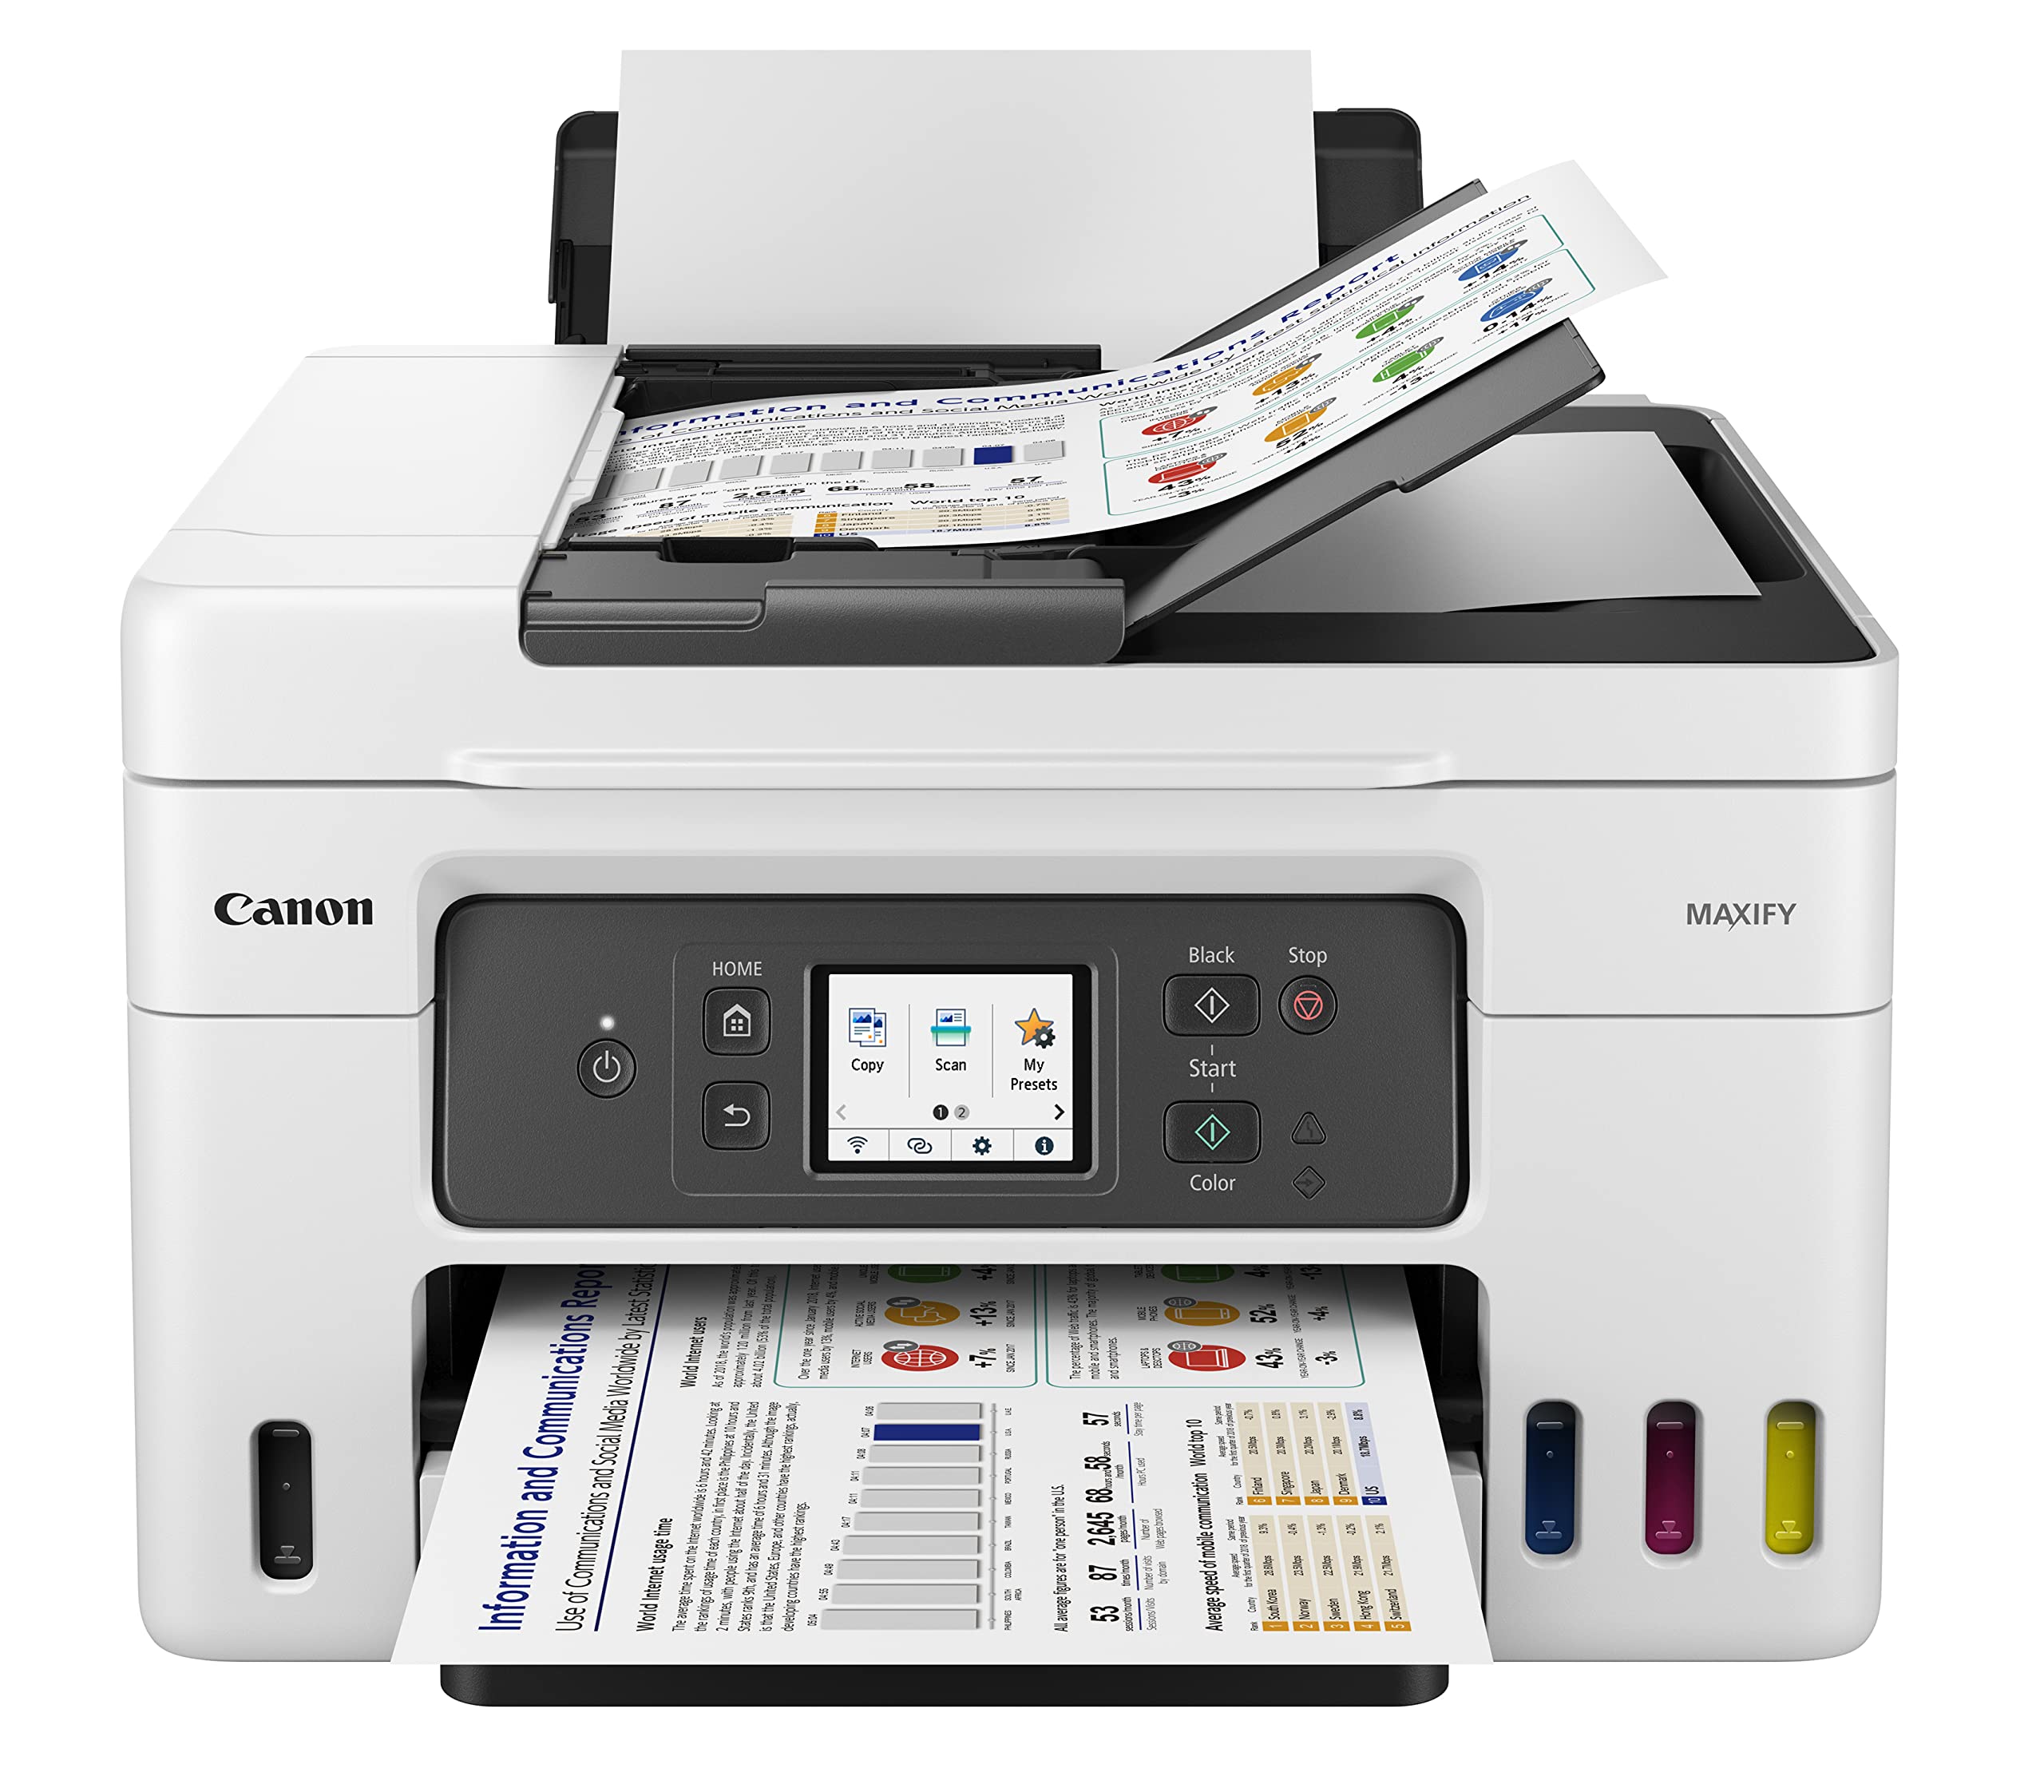 Canon MAXIFY GX4020 Wireless MegaTank All-in-One Color Printer, [Print, Copy, Scan, Fax ], with Mobile Printing, Auto Document Feeder and 2.7